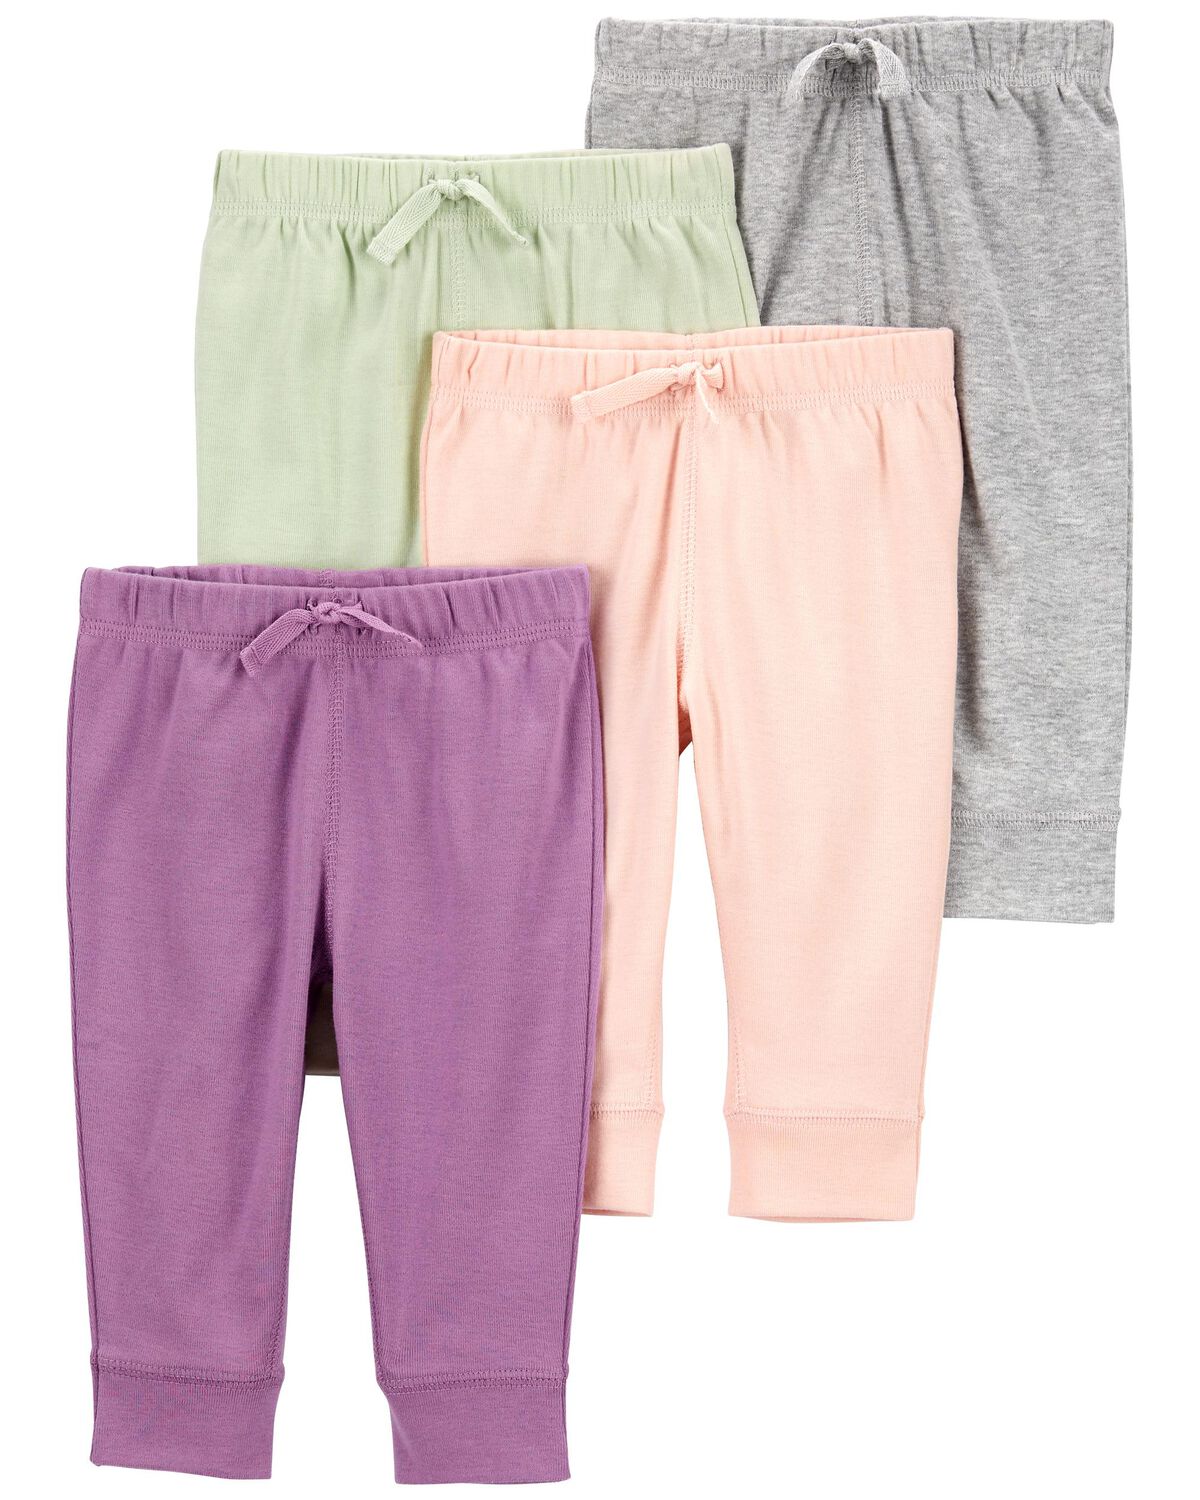 Multi Baby 4-Pack Pull-On Pants | carters.com